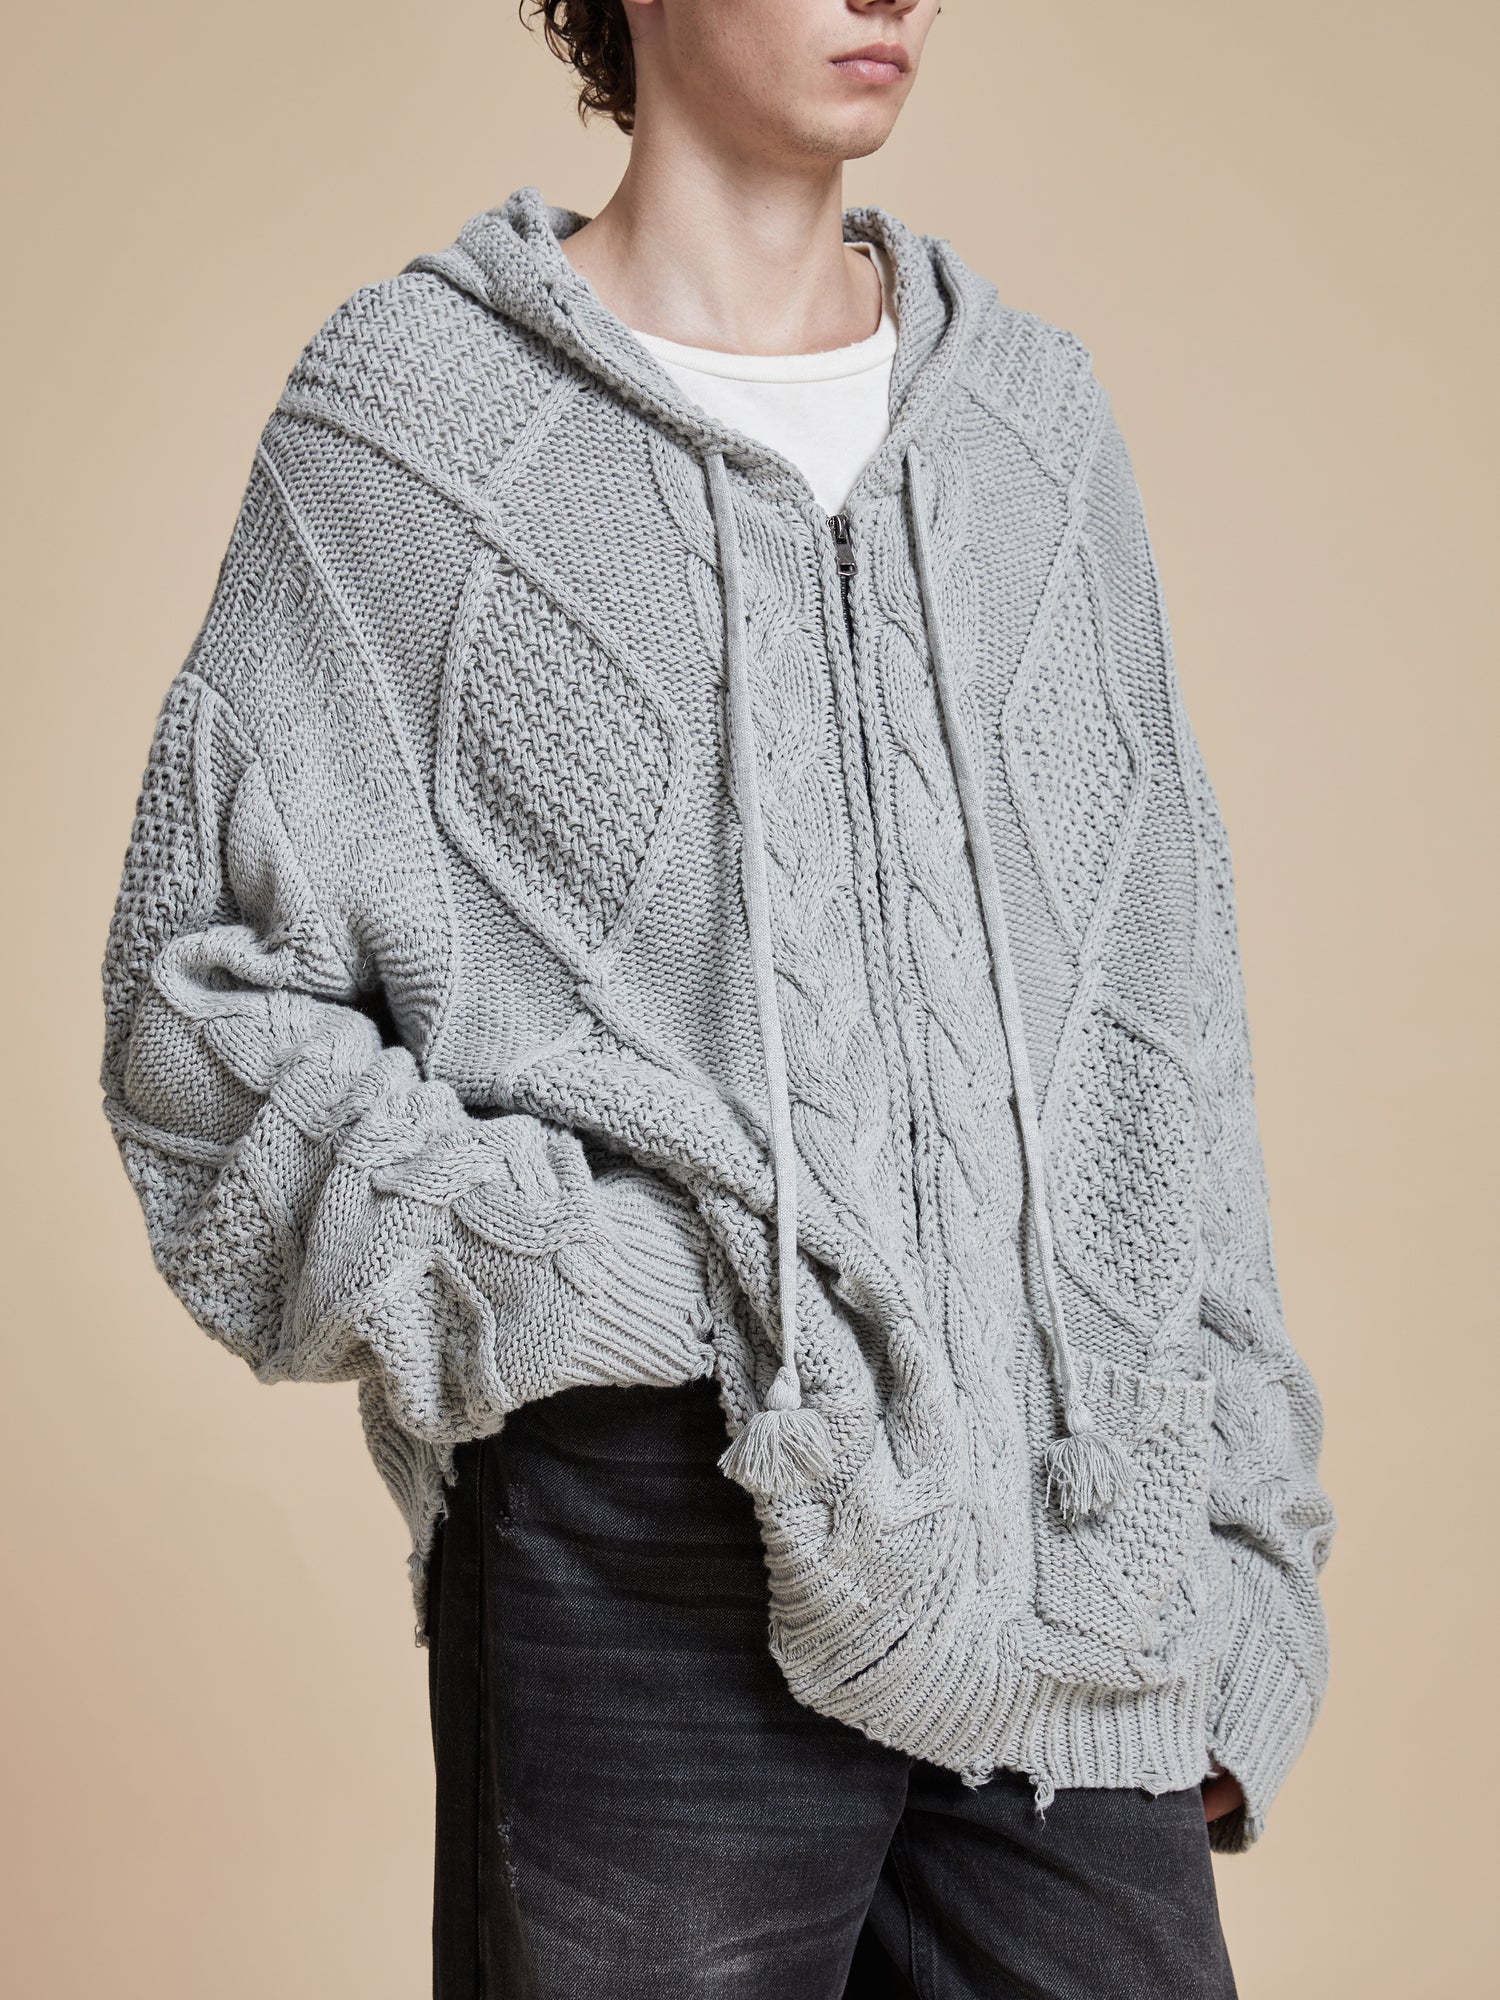 The model is wearing a warm Found Zip Up Distressed Cable Knit Hoodie sweater.